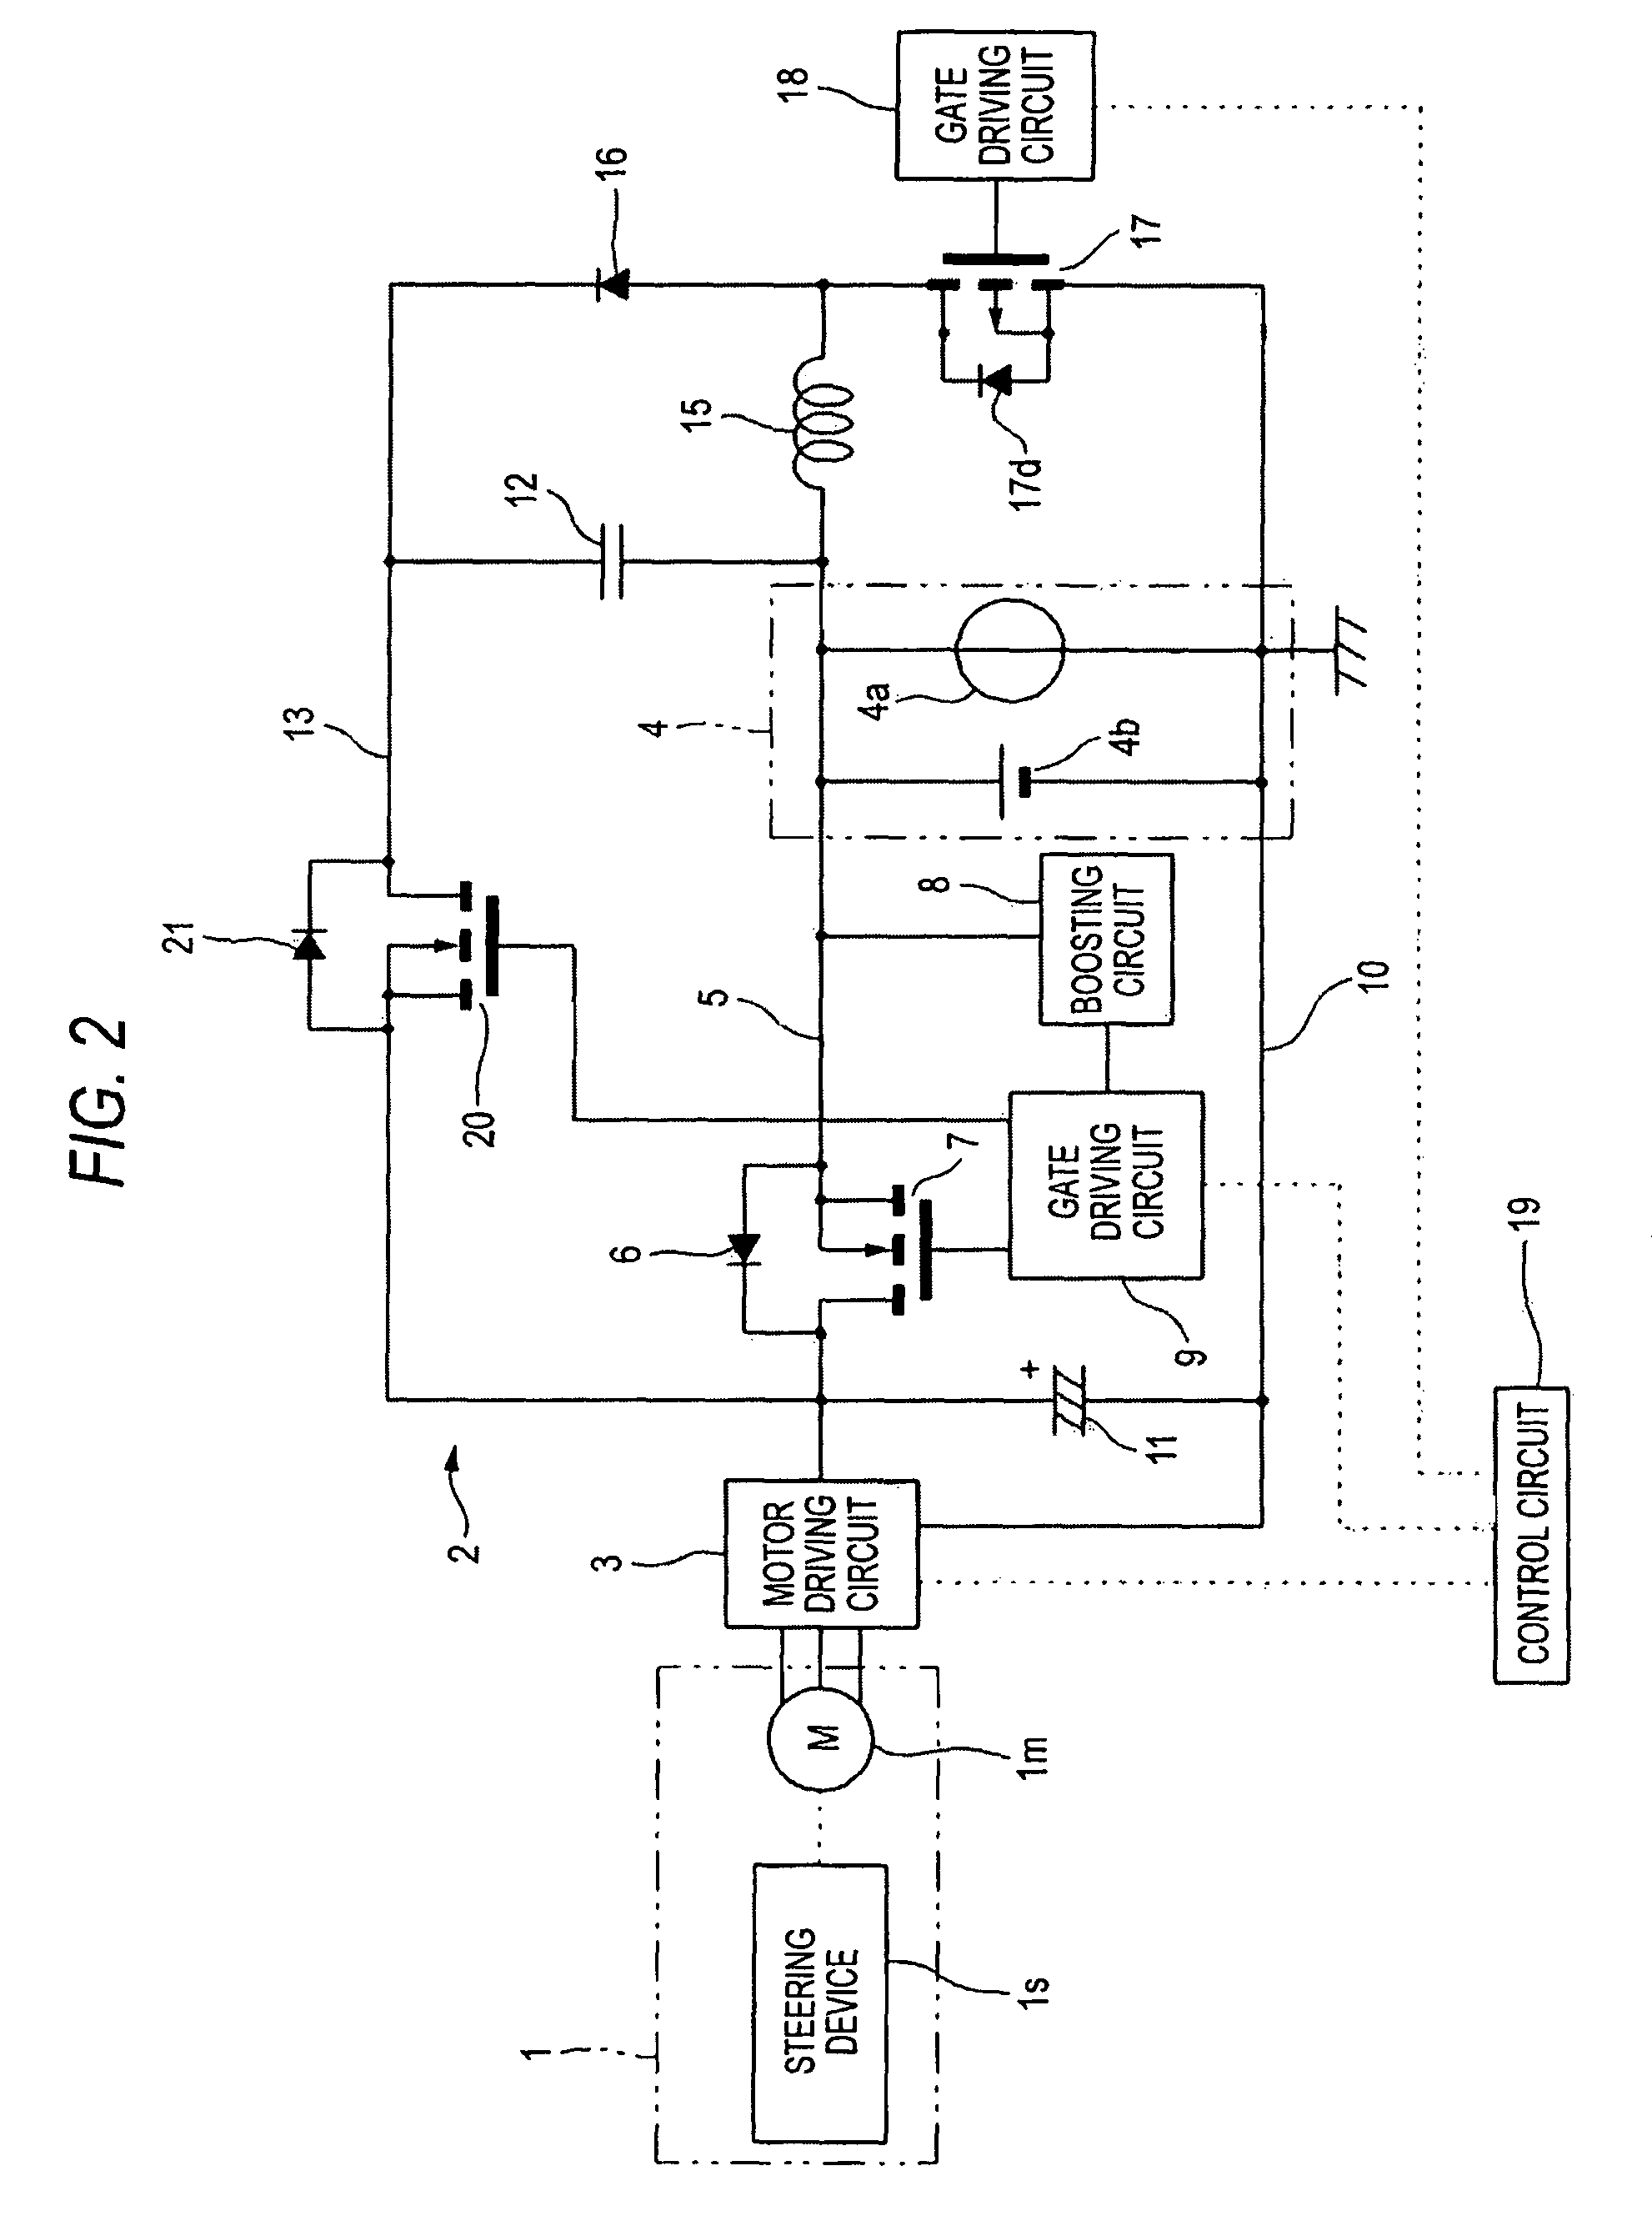 Motor controller of electric power steering device